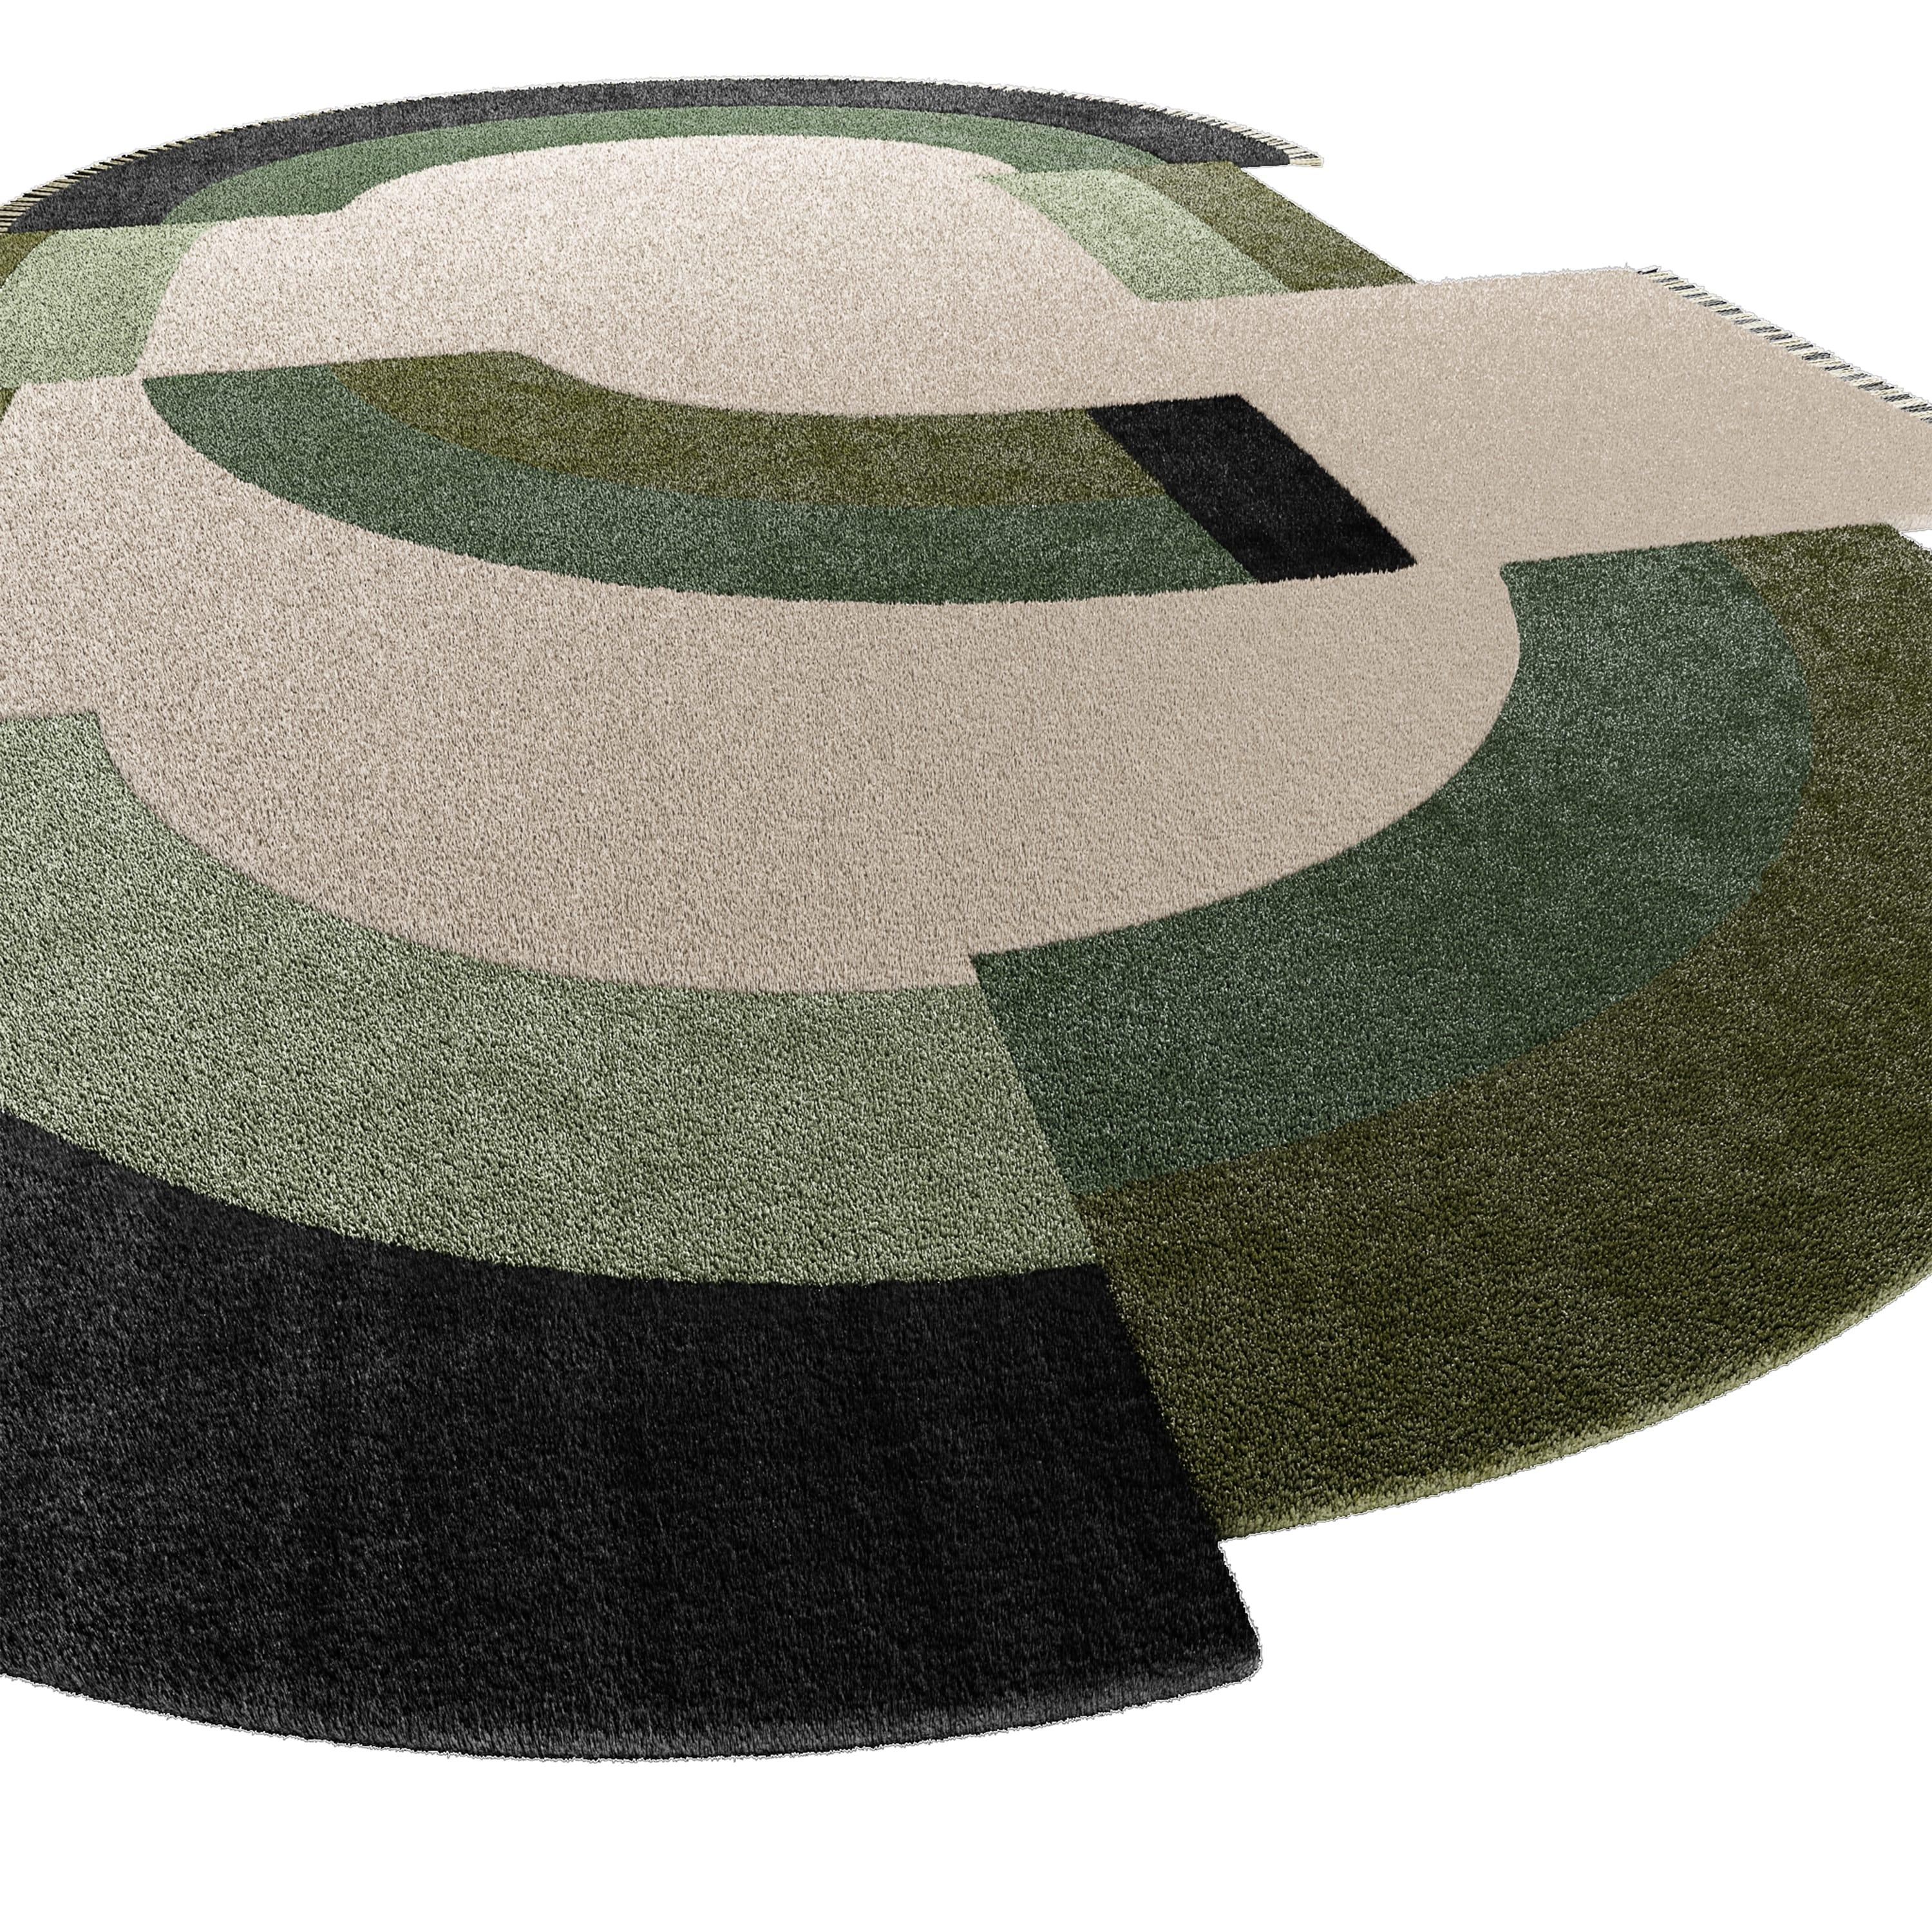 Tapis Shaped #030 also known as Zaid is a round rug by HOMMÉS Studio x TAPIS Studio. Its oval shape is ideal to add movement and liveness to a rectangular room. Zaid fragmented shape will make all eyes lay on the floor, so be sure that every detail